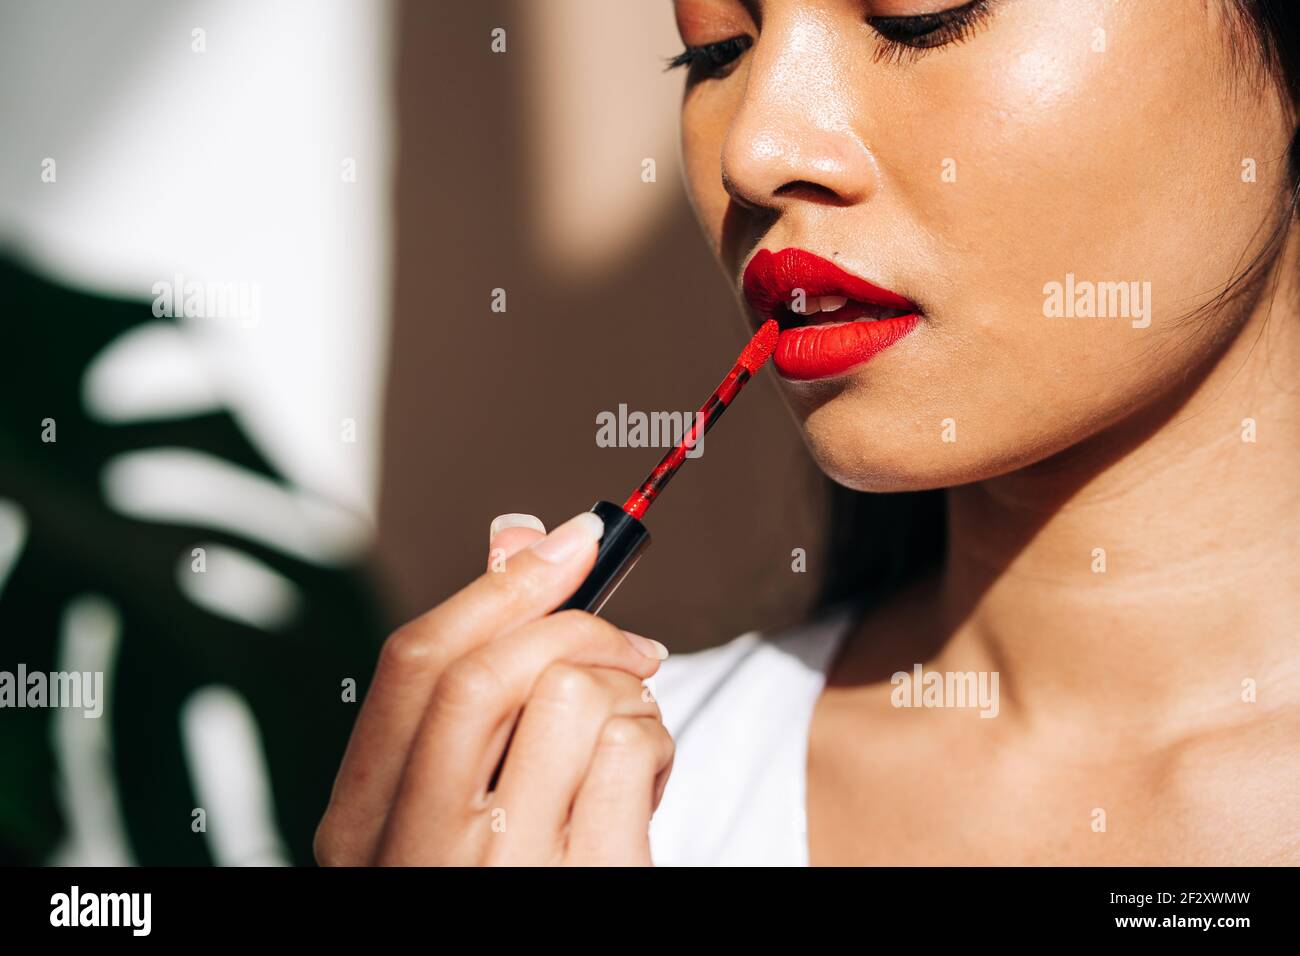 Portrait of crop thoughtful ethnic female with long dark hair looking down and rouging lips with red lipstick Stock Photo